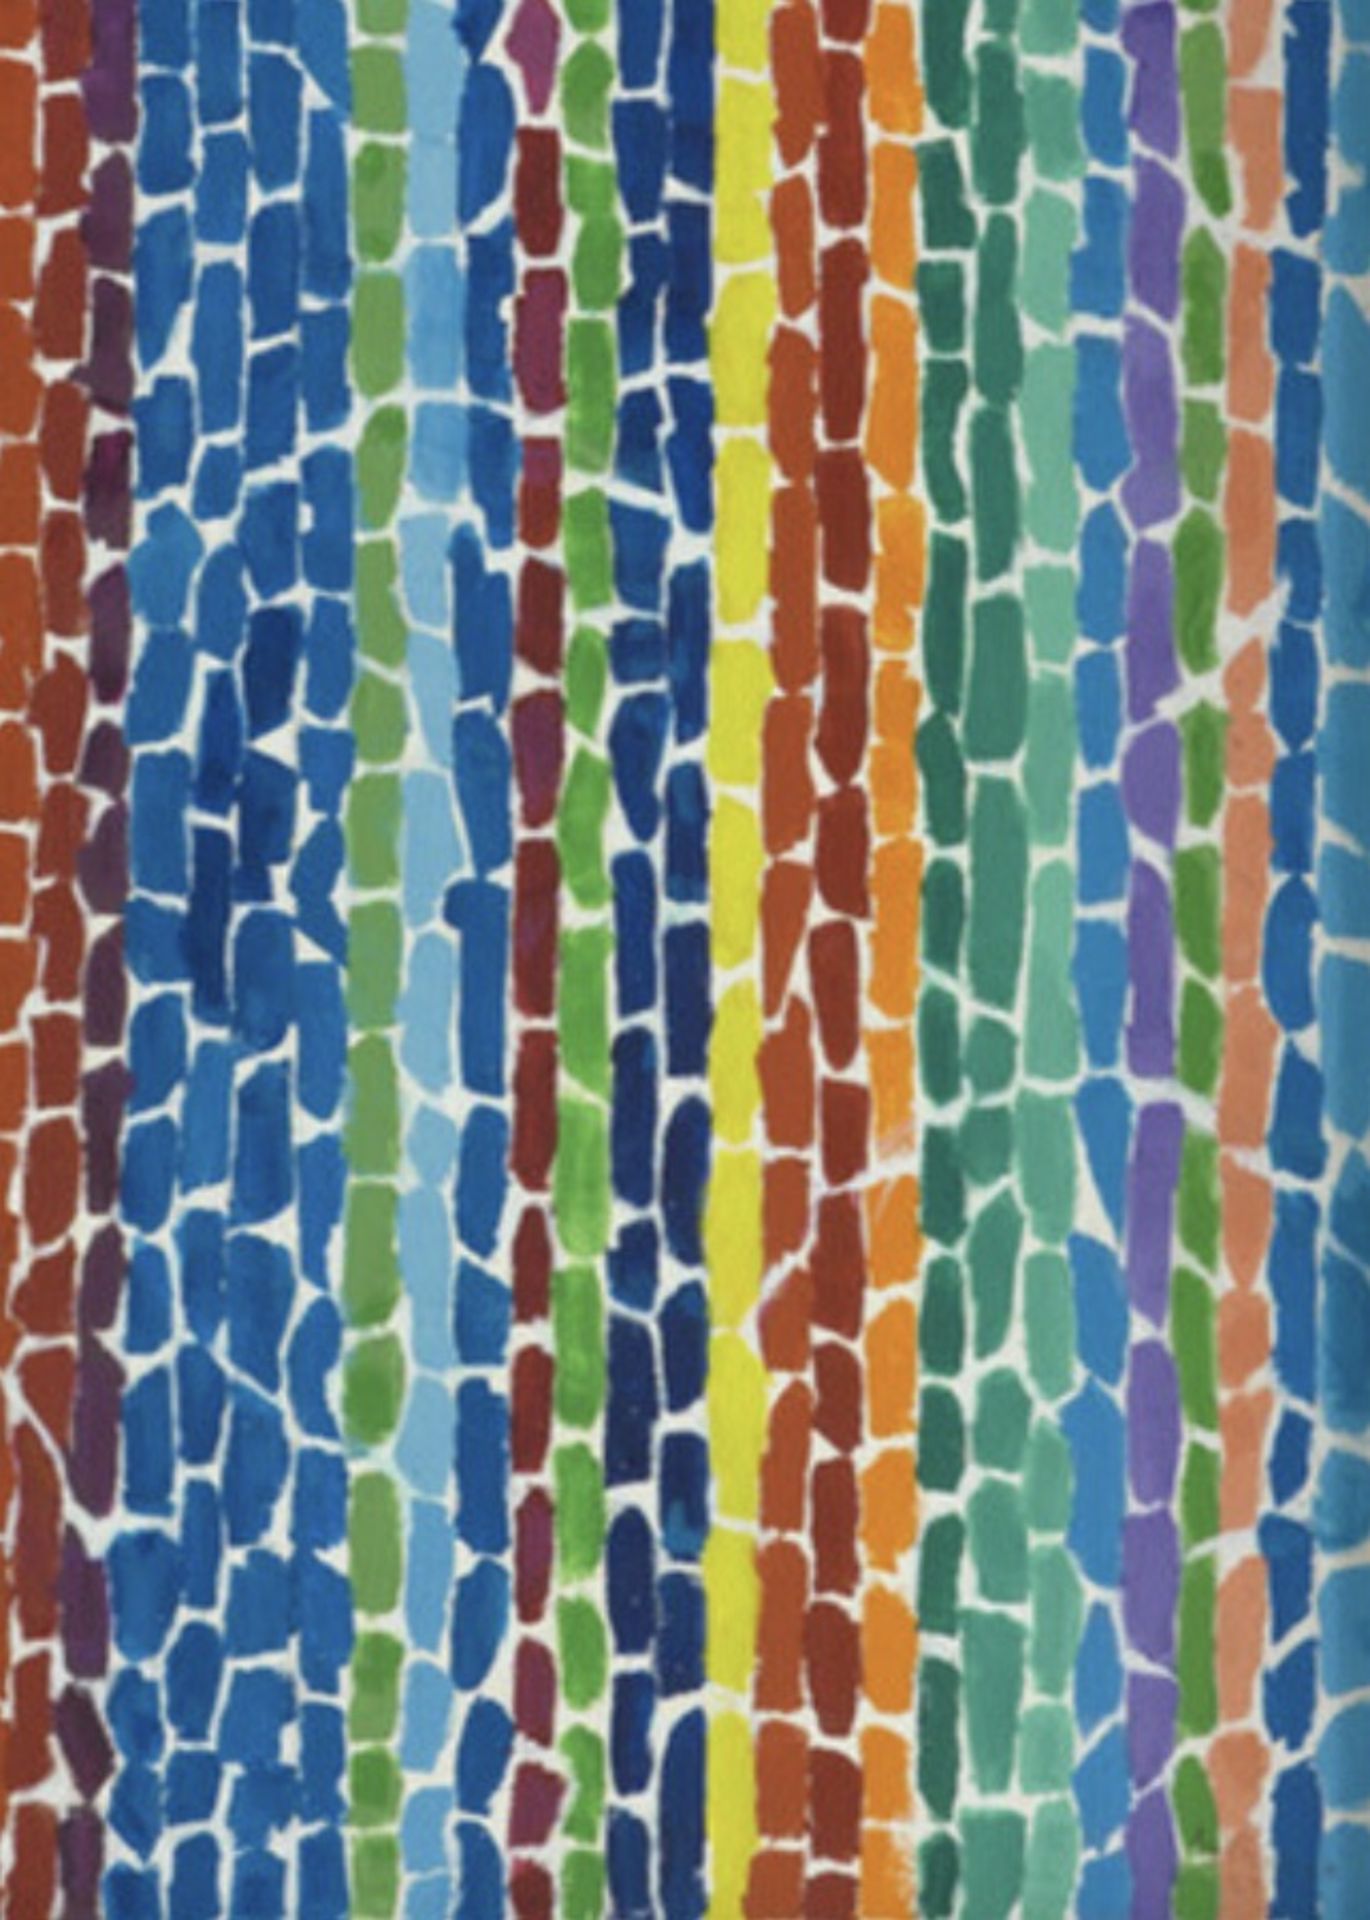 Alma Thomas "Wind, Sunshine, and Flowers, 1968" Offset Lithograph - Image 2 of 5